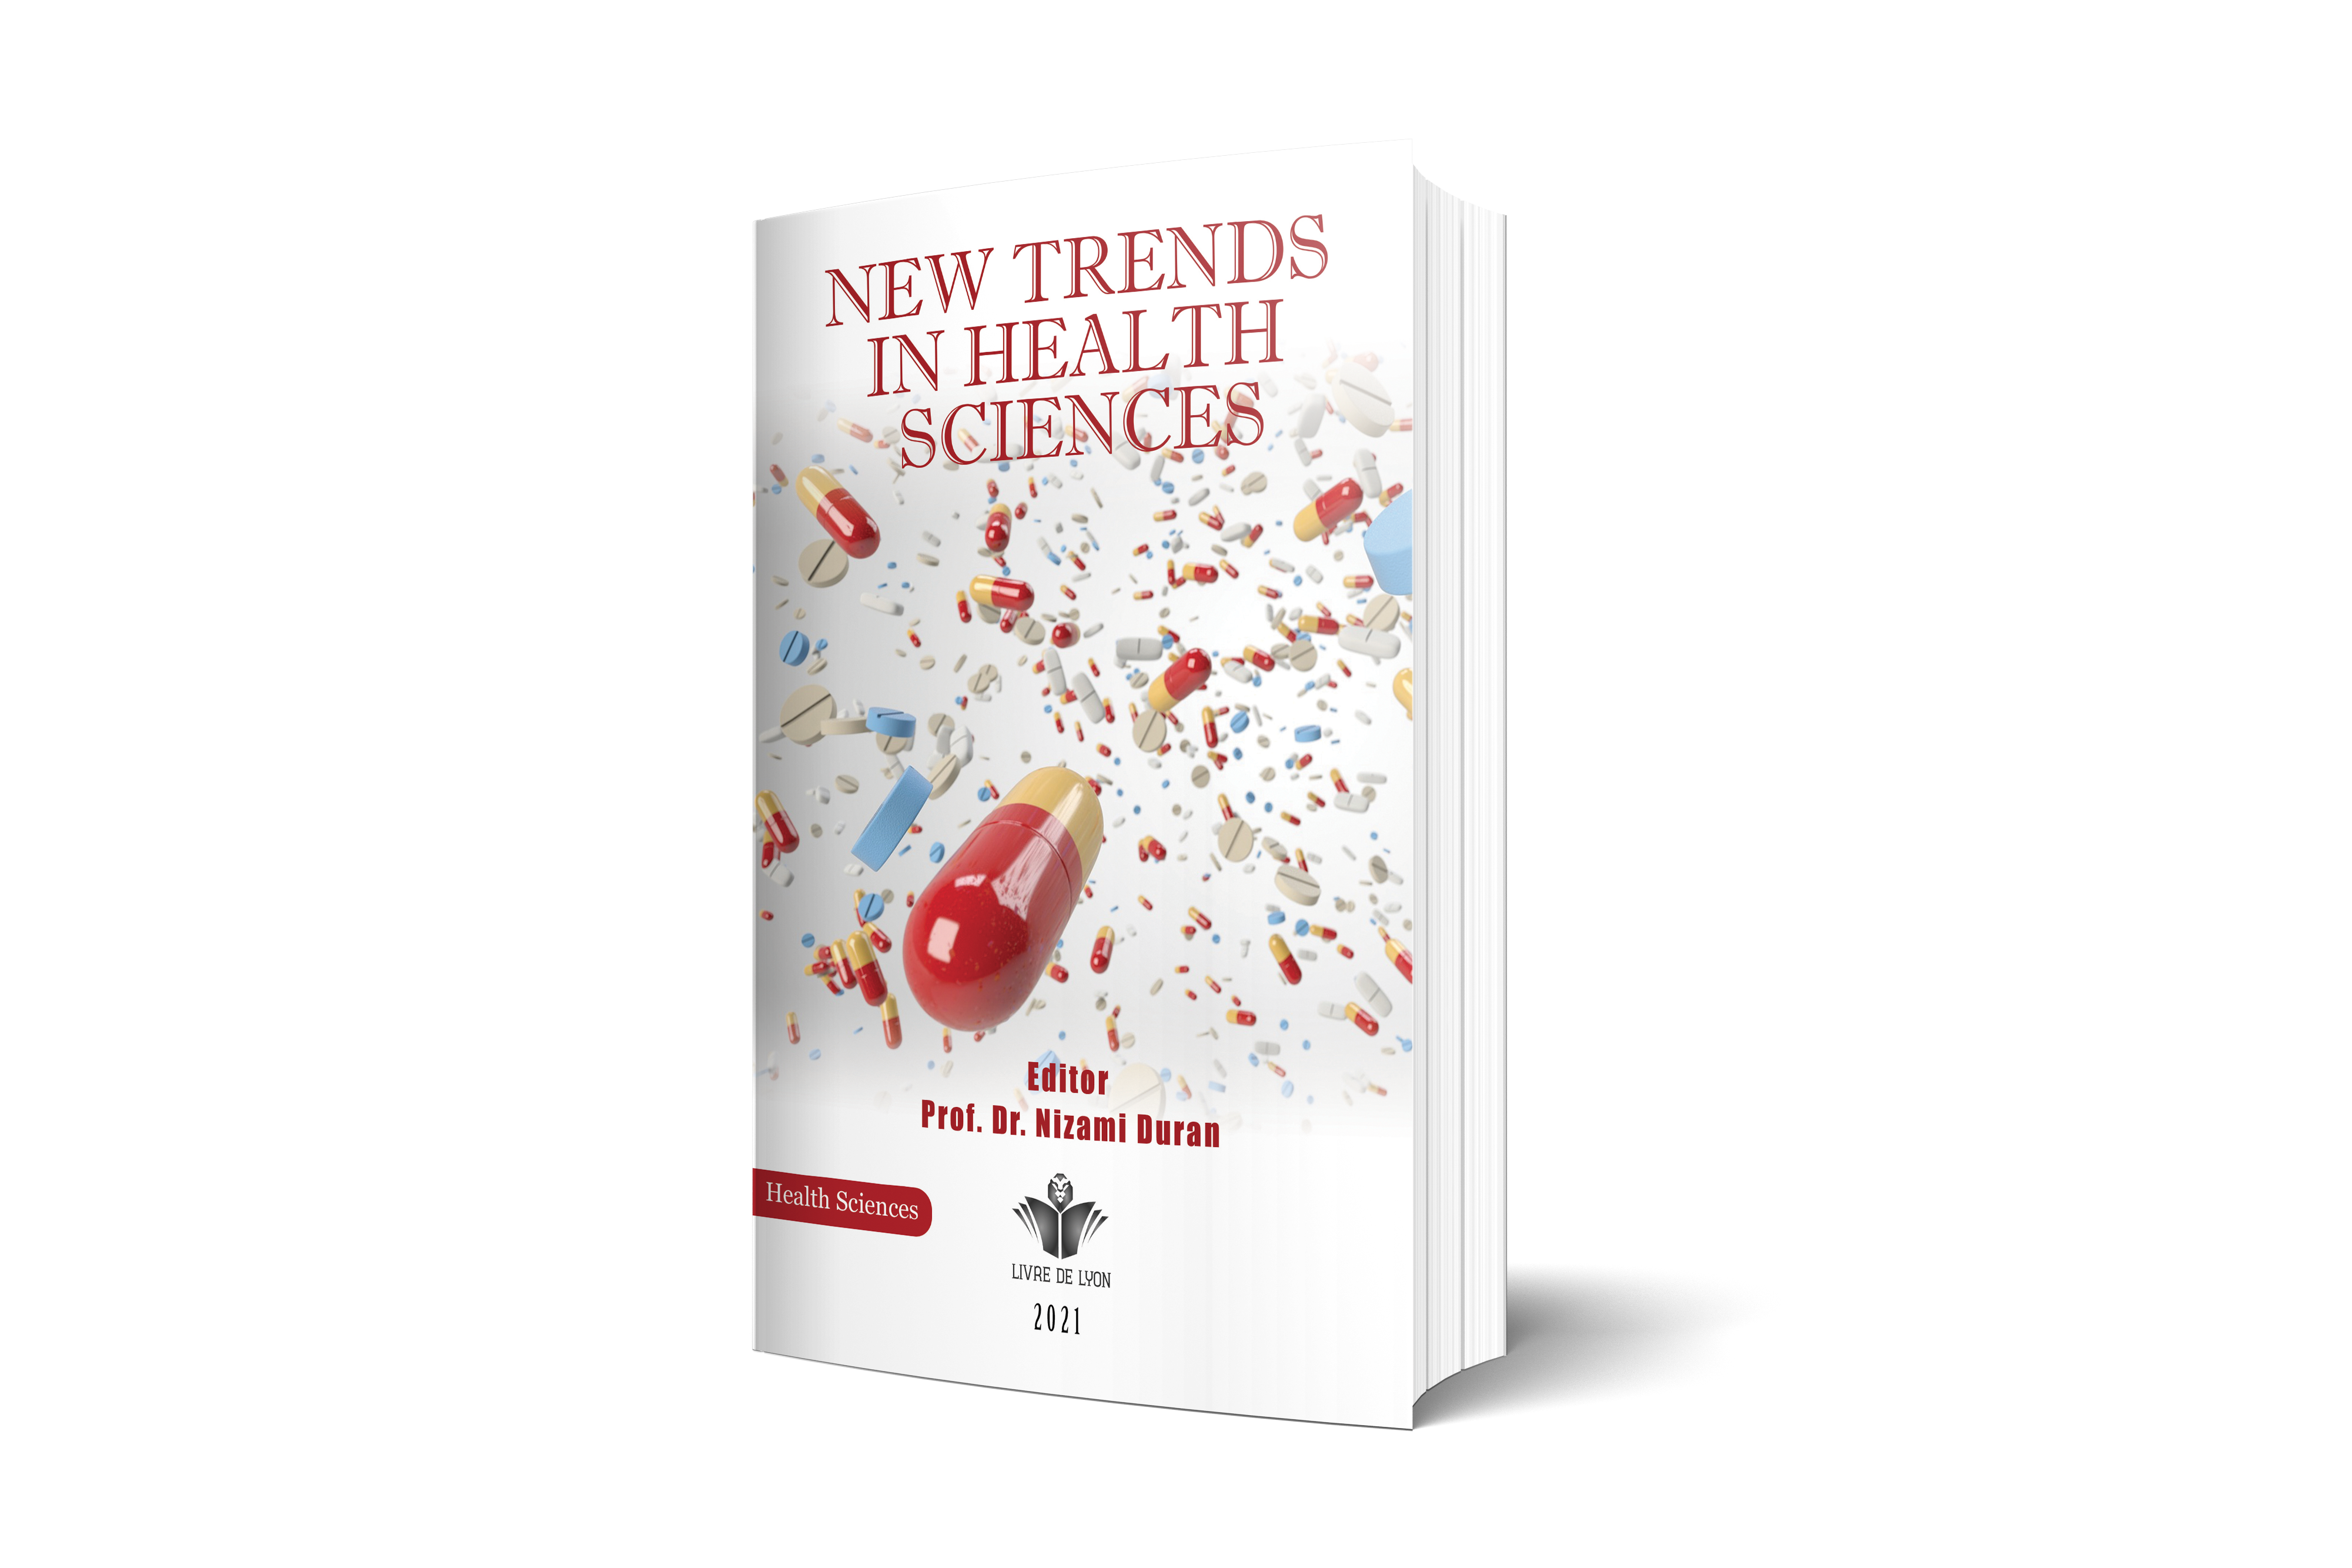 New Trends in Health Sciences